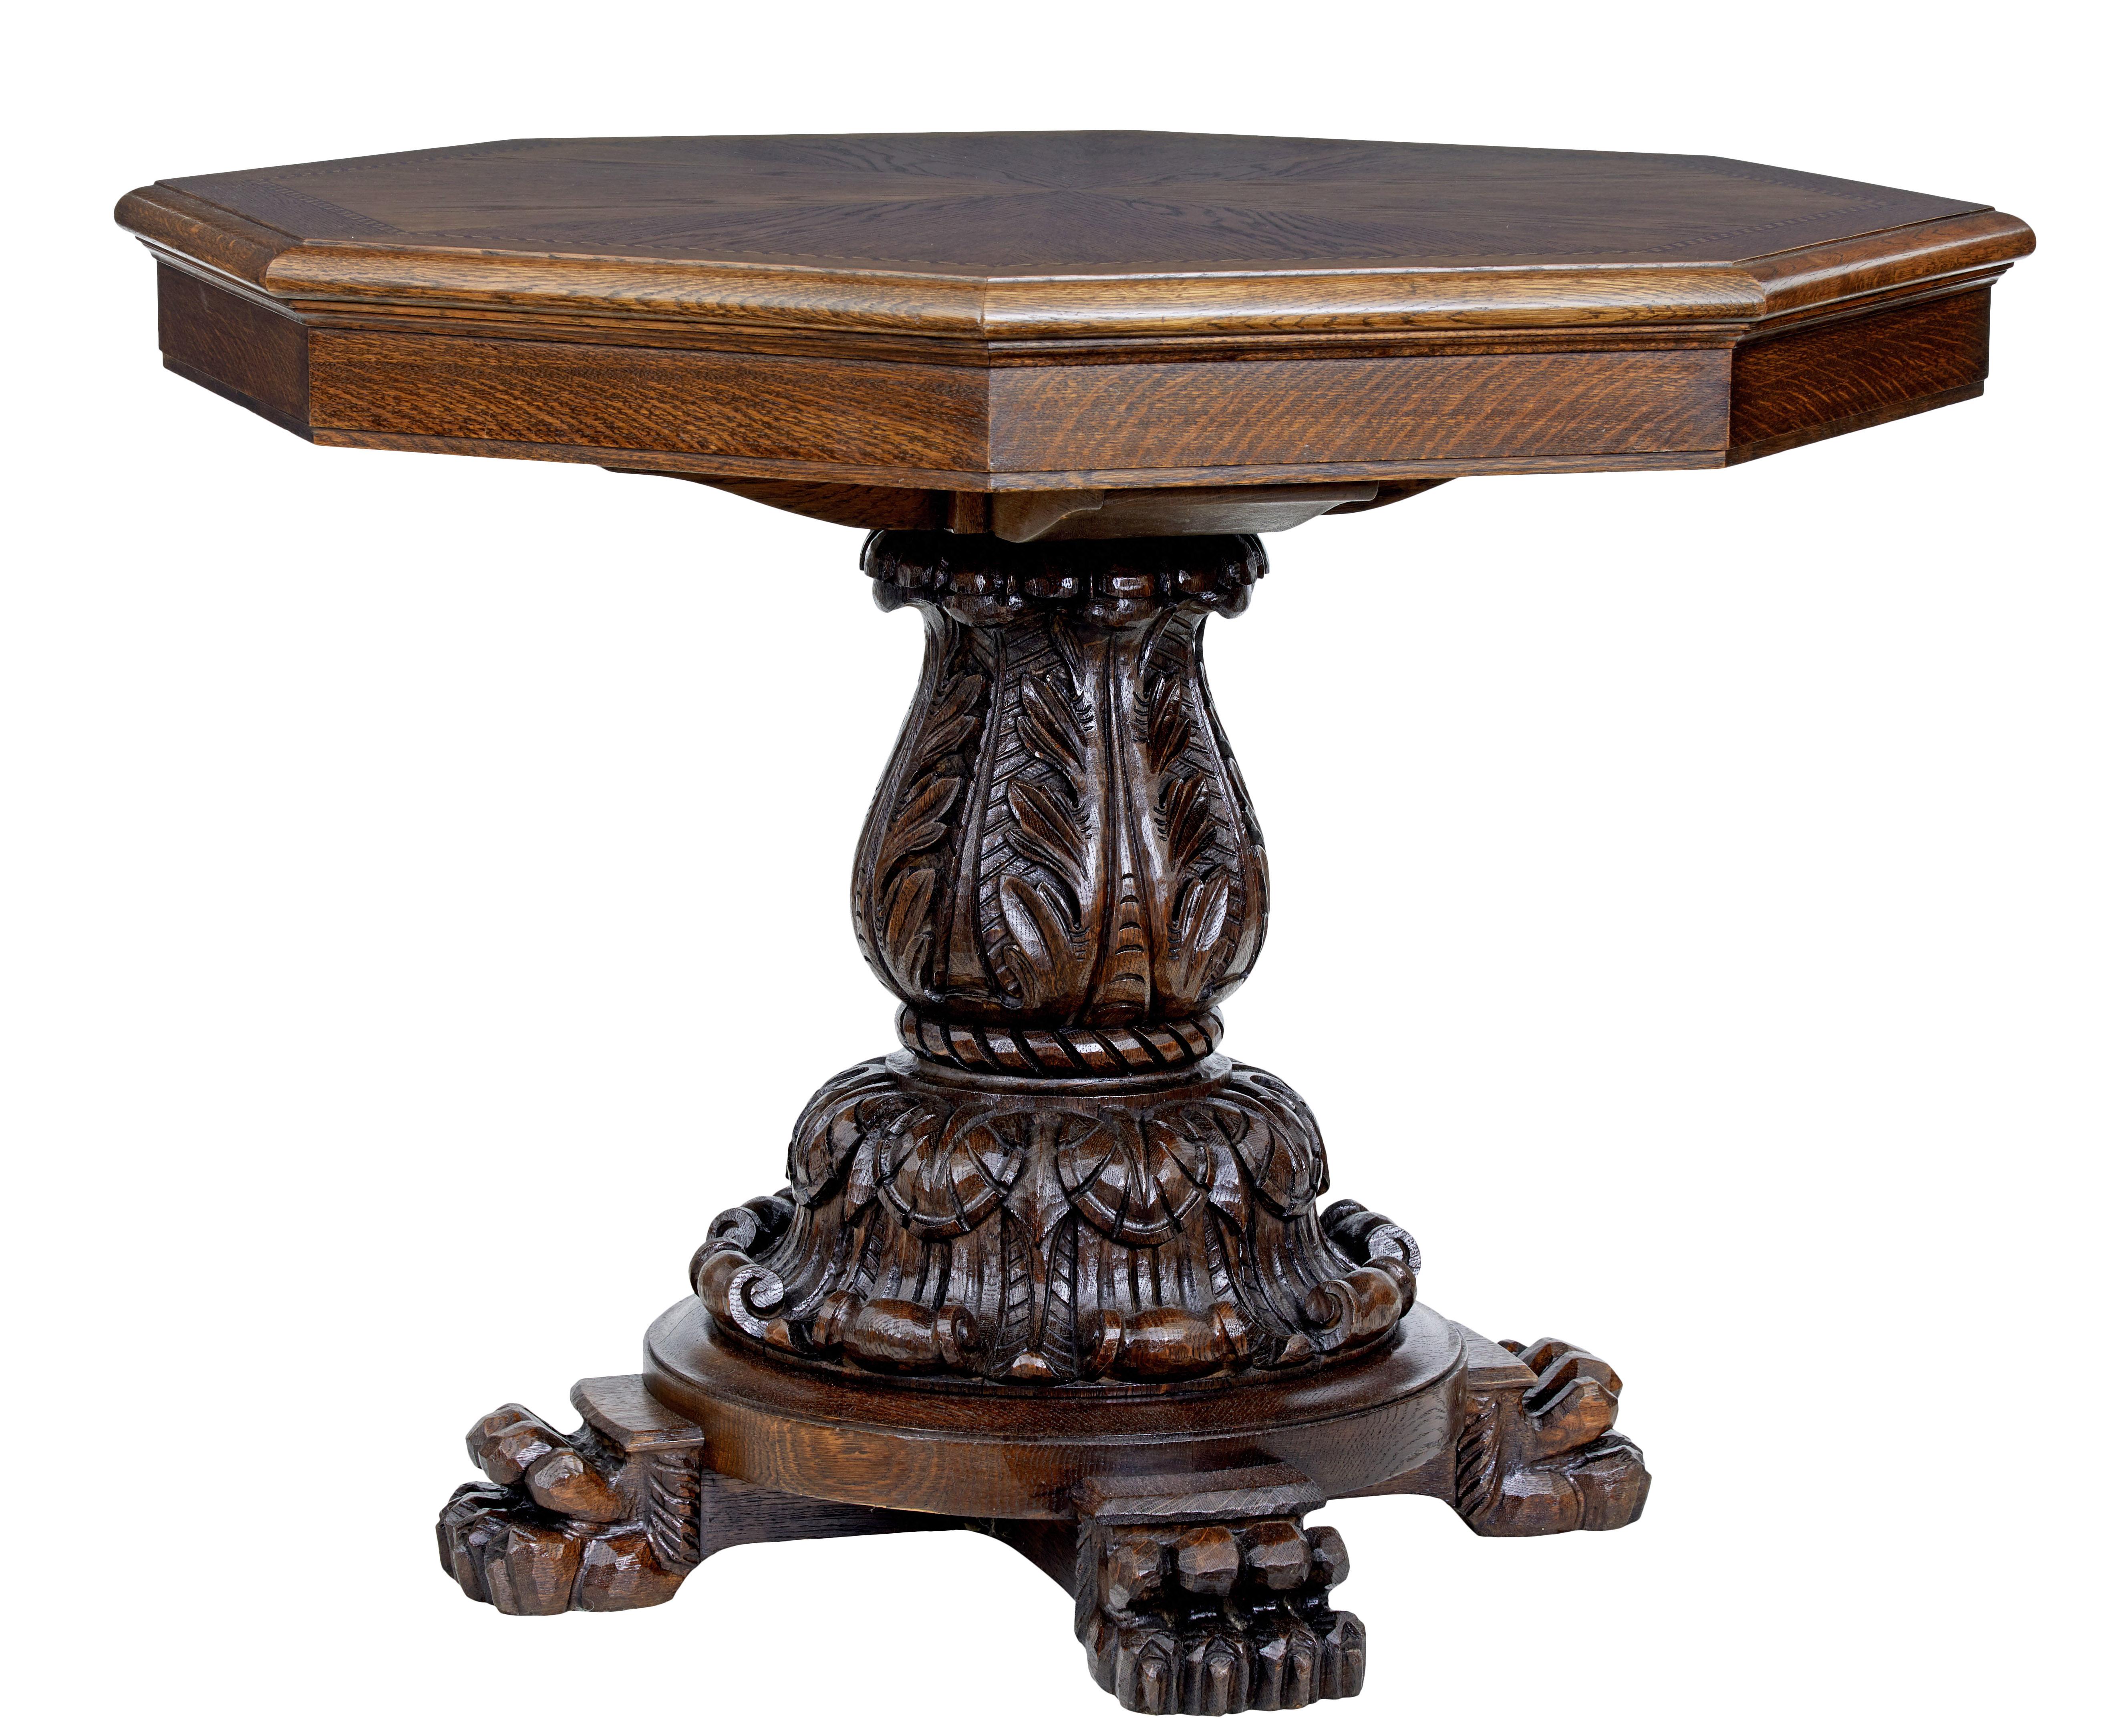 Good quality oak centre table, circa 1880.

Hexagonal top with segmented oak veneers surrounded by birch and mahogany inlay. Standing on a heavily carved stem base with acanthus leaf detailing.

Round base supported by 4 carved paw